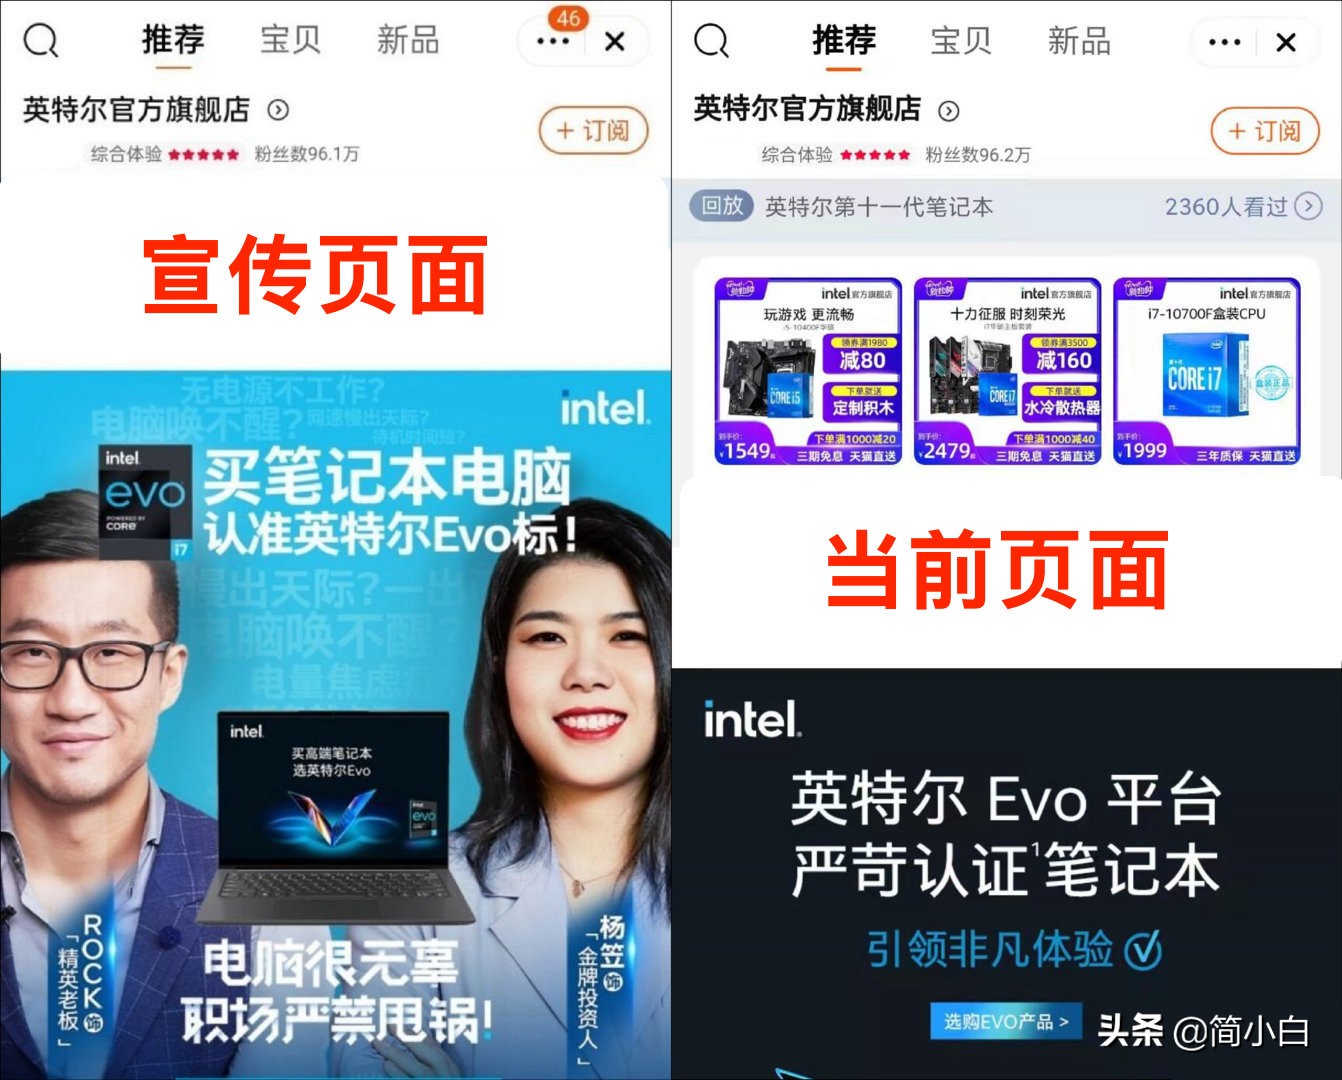 Delete small gain, issue a page! Intel looks for Yang Li conduct propaganda to be boycotted by male netizen